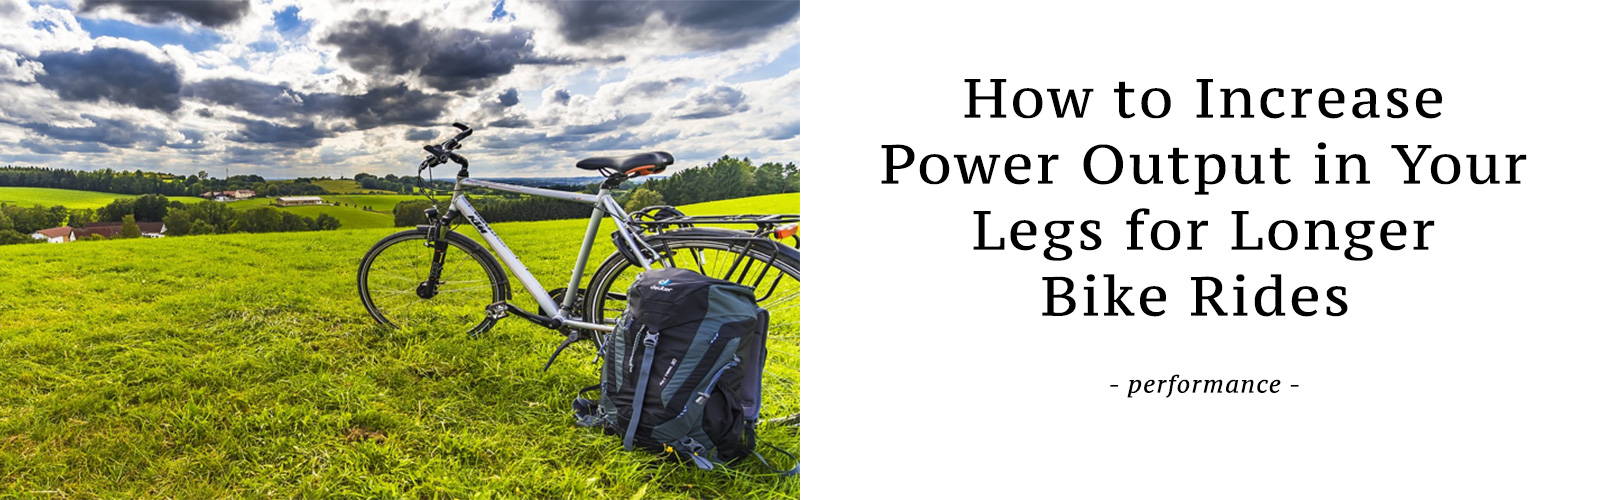 How to Increase Power Output in Your Legs for Longer Bike Rides